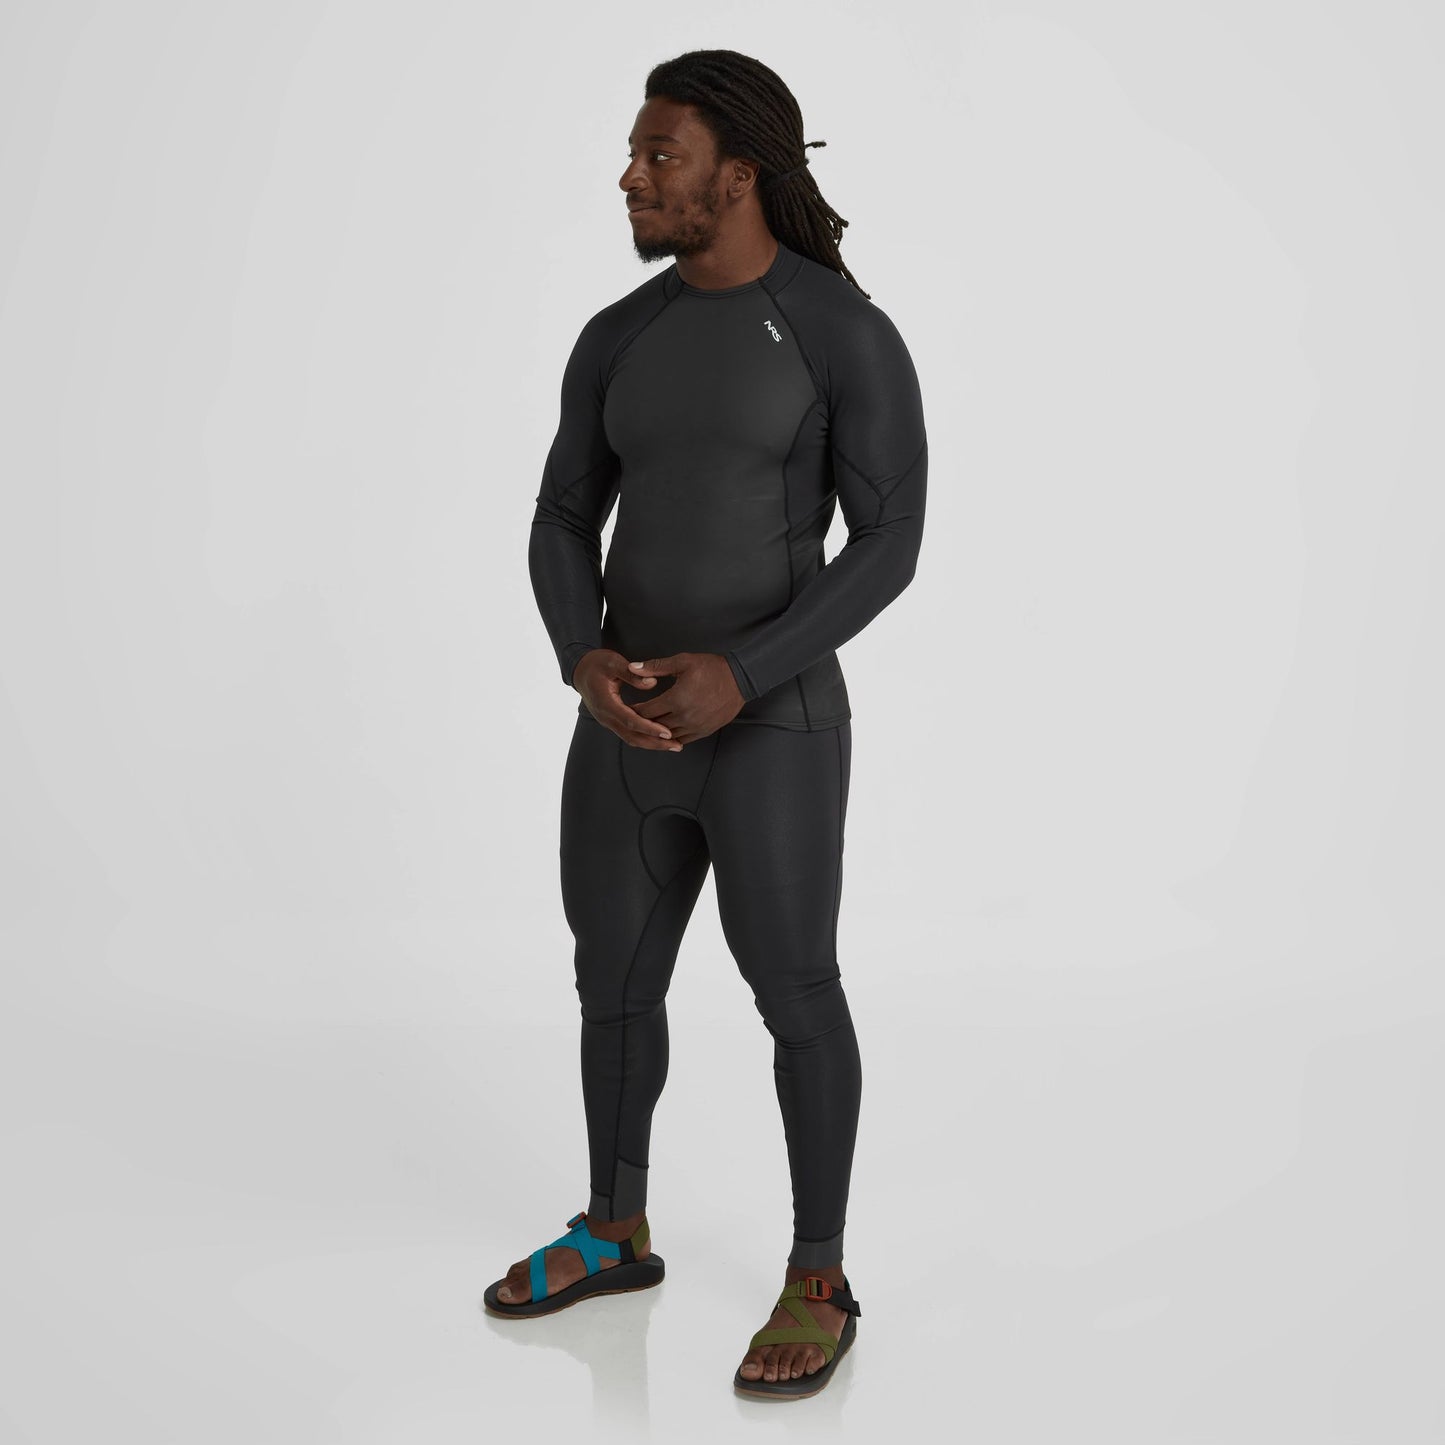 A man wearing an NRS Hydroskin 1.0 Long Sleeve Shirt - Men's to stay warm in the cold water.